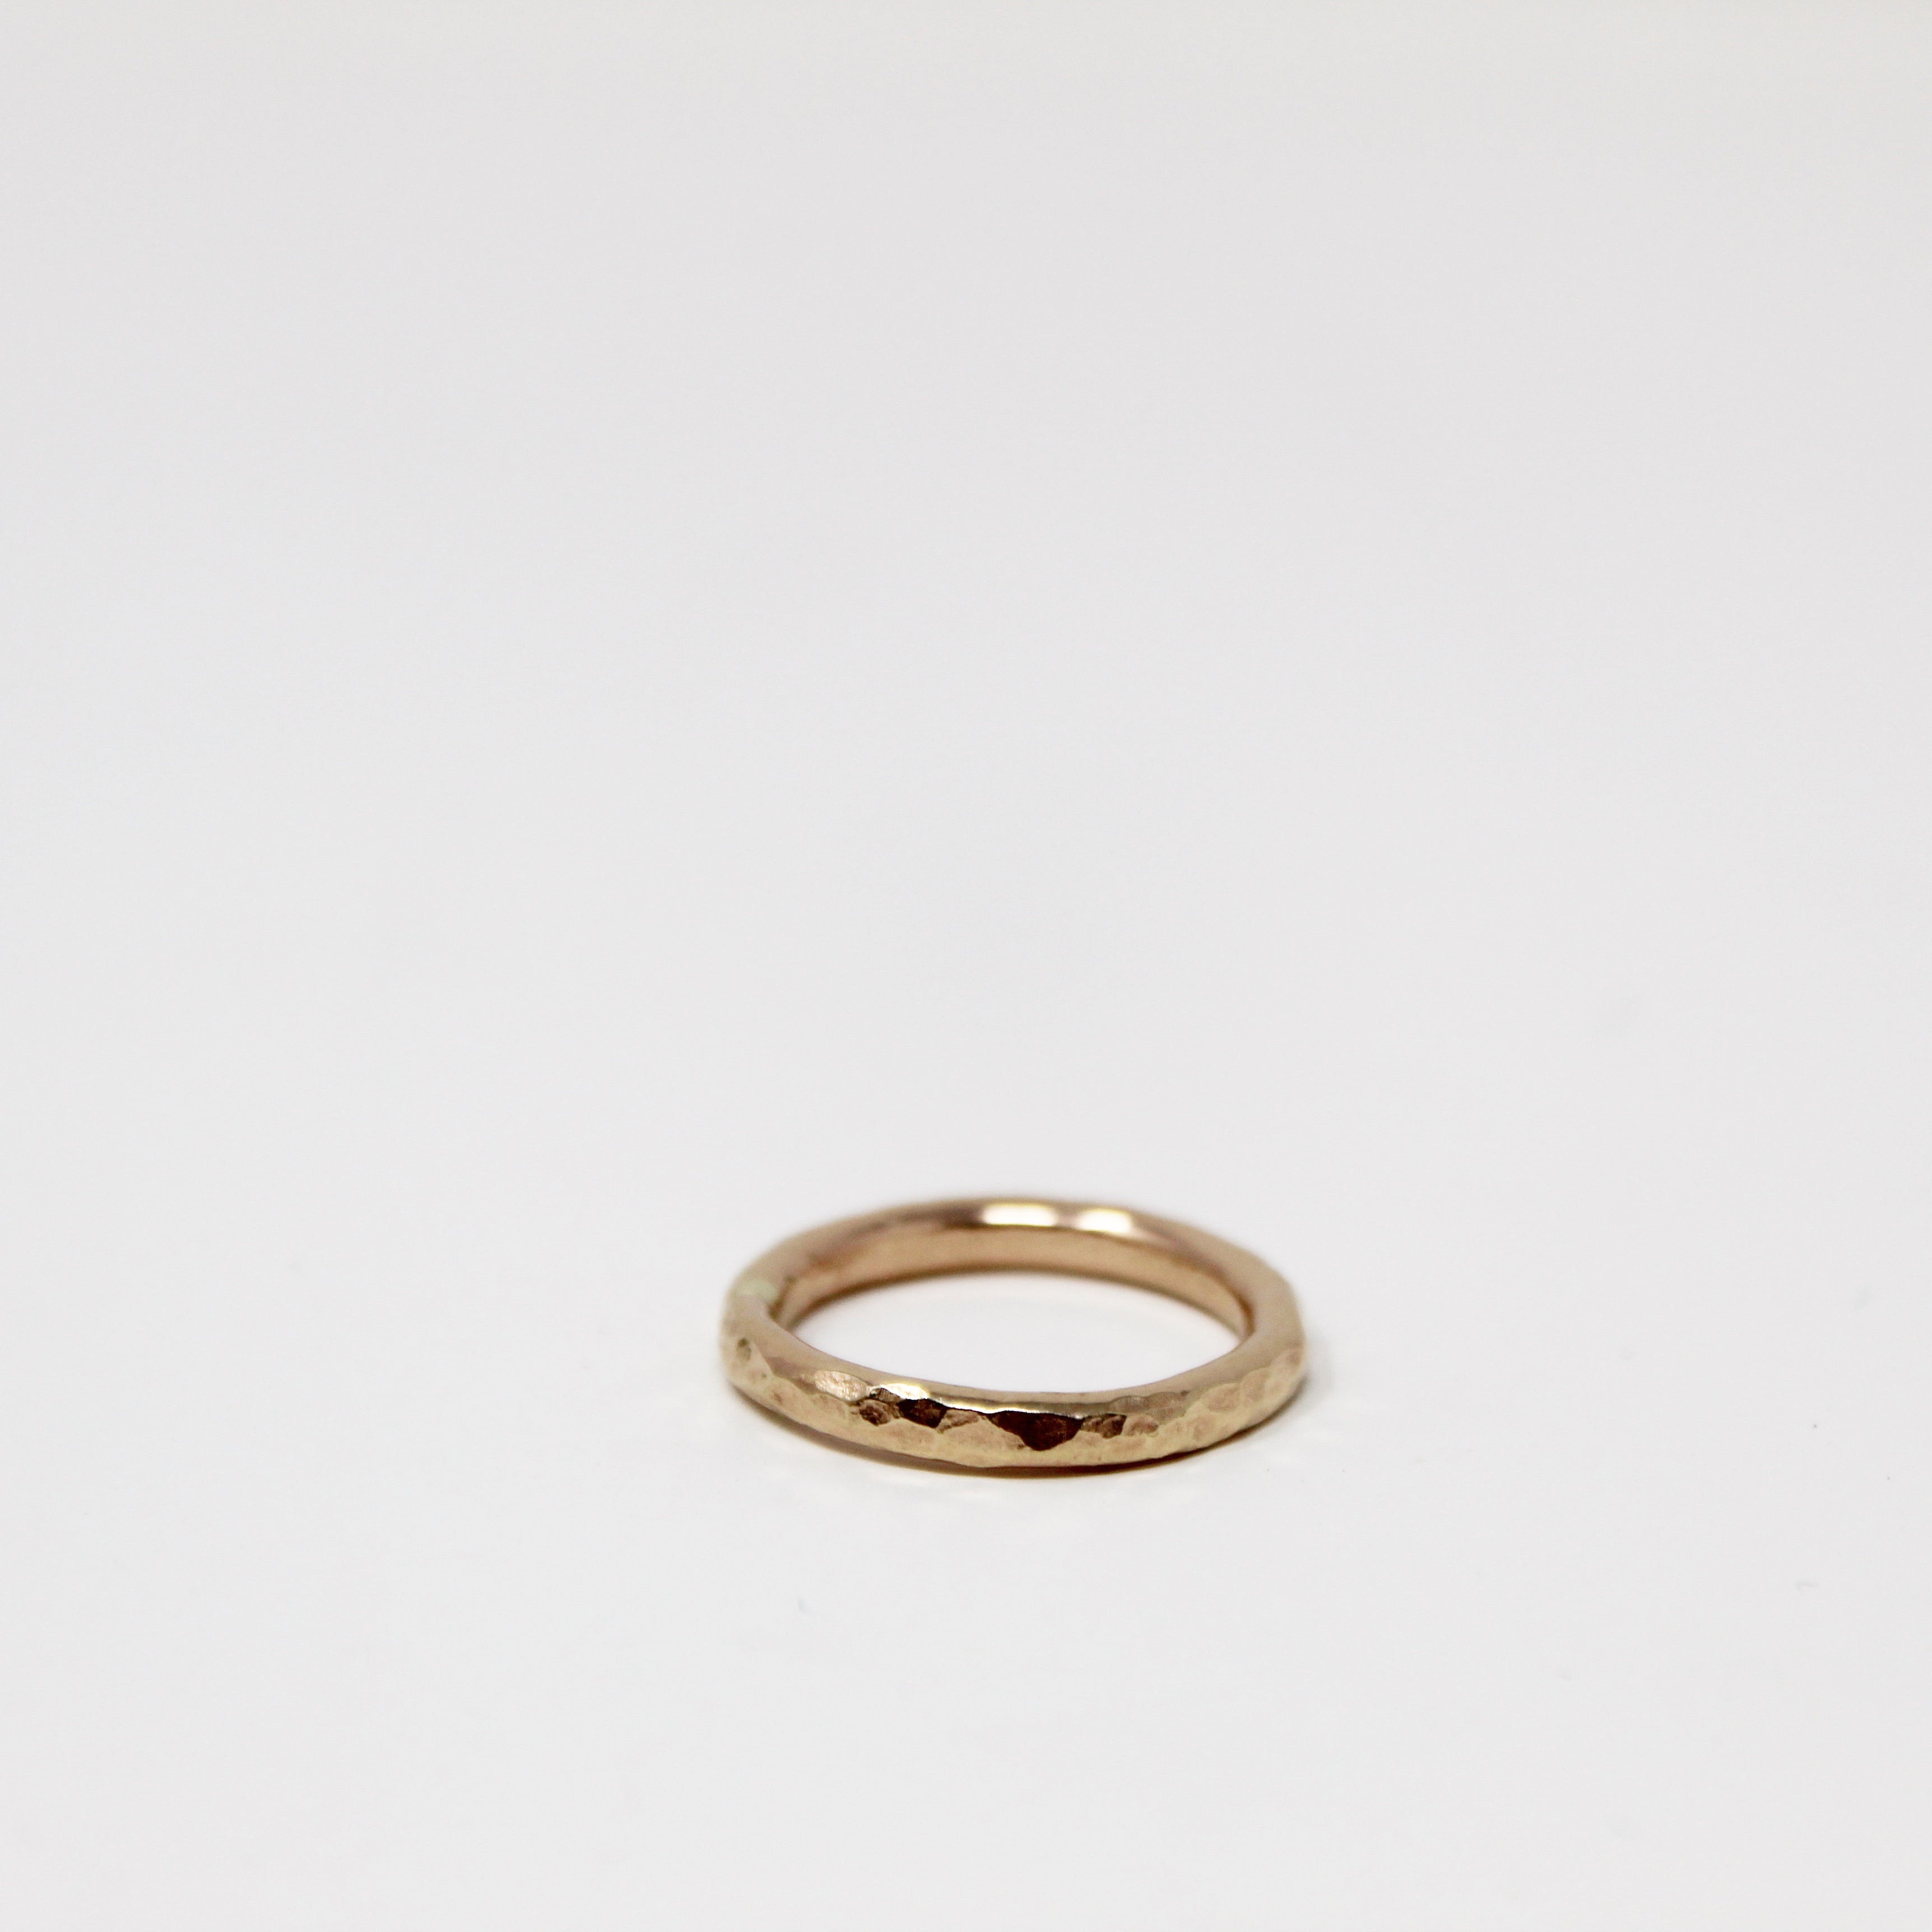 Chunky hammered ring